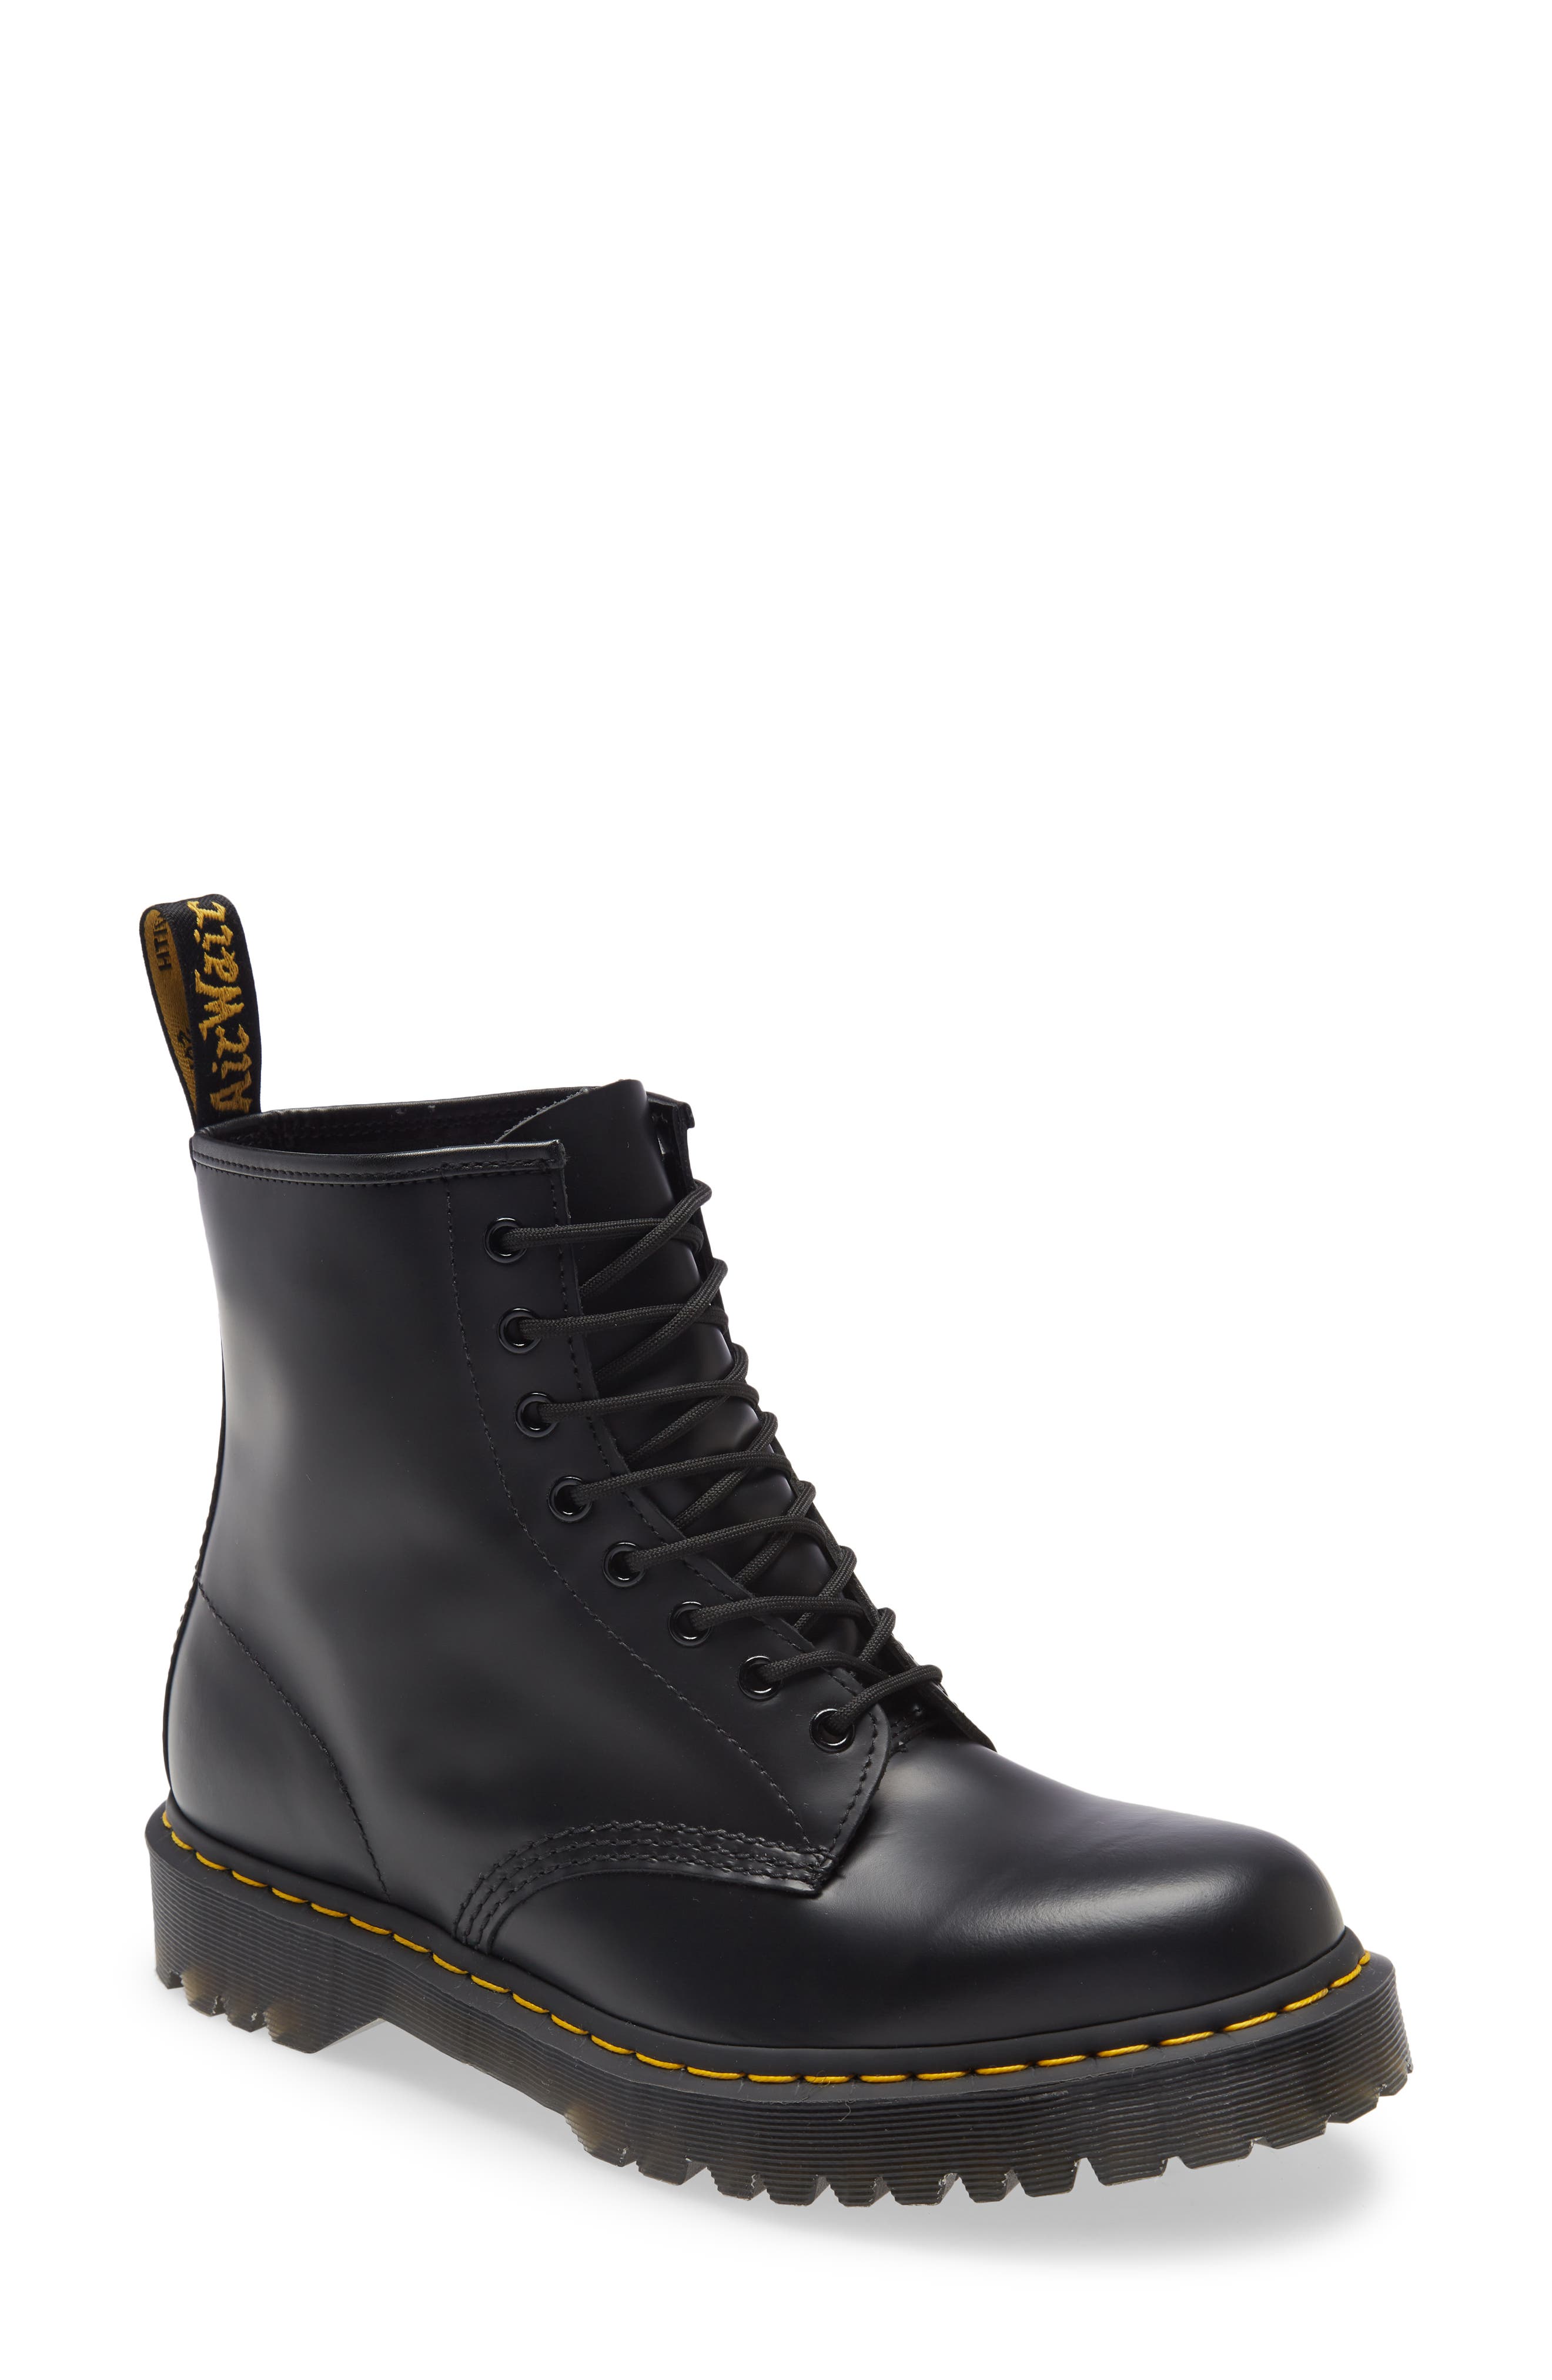 Dr. Martens 1460 Bex Plain Toe Boot in Black Smooth Leather